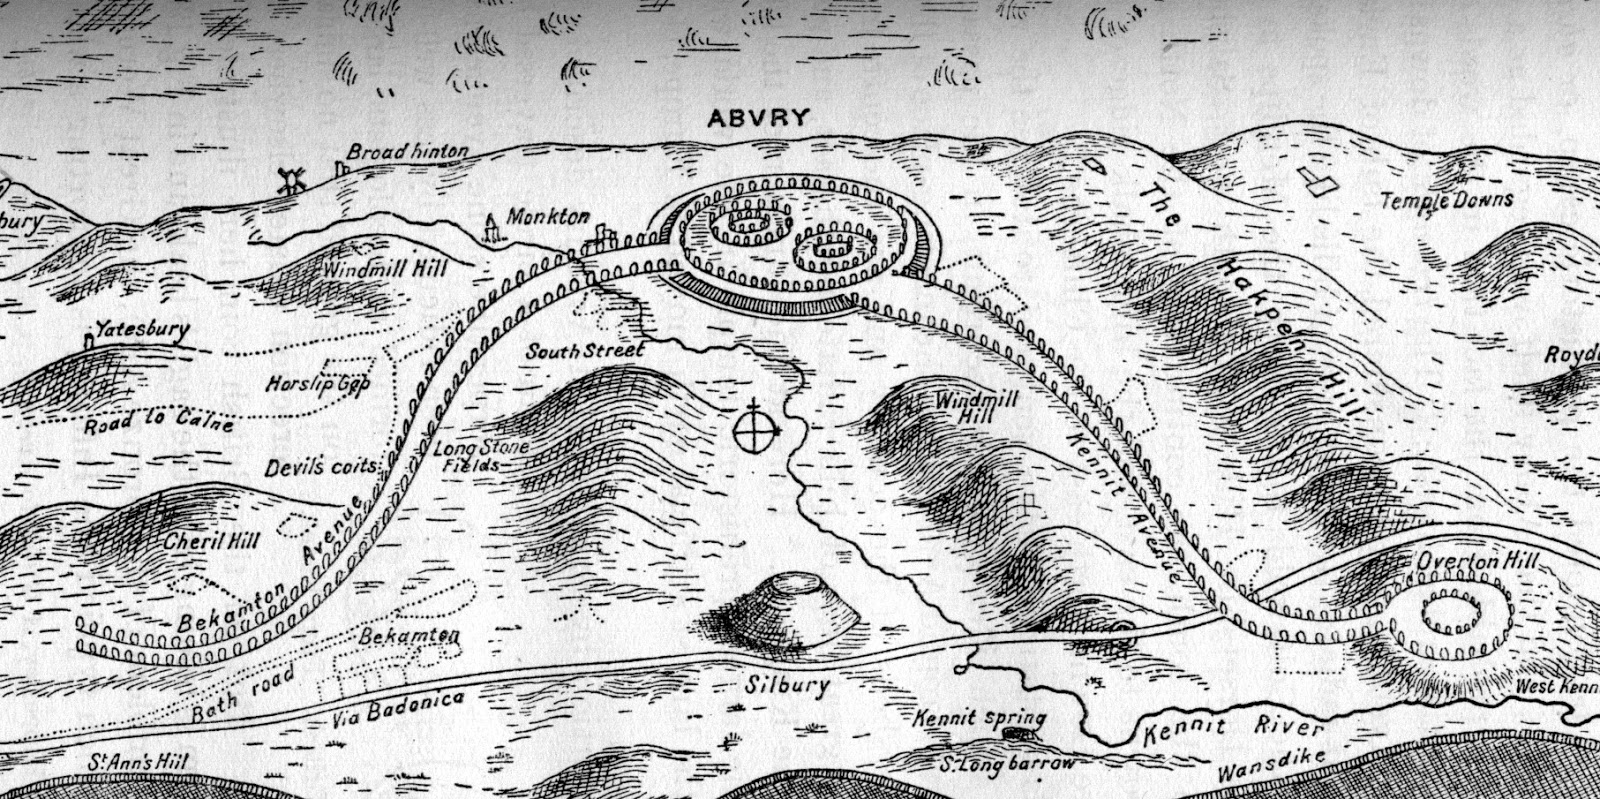 Mound Builders Serpent Mound in Peebles, Ohio and its